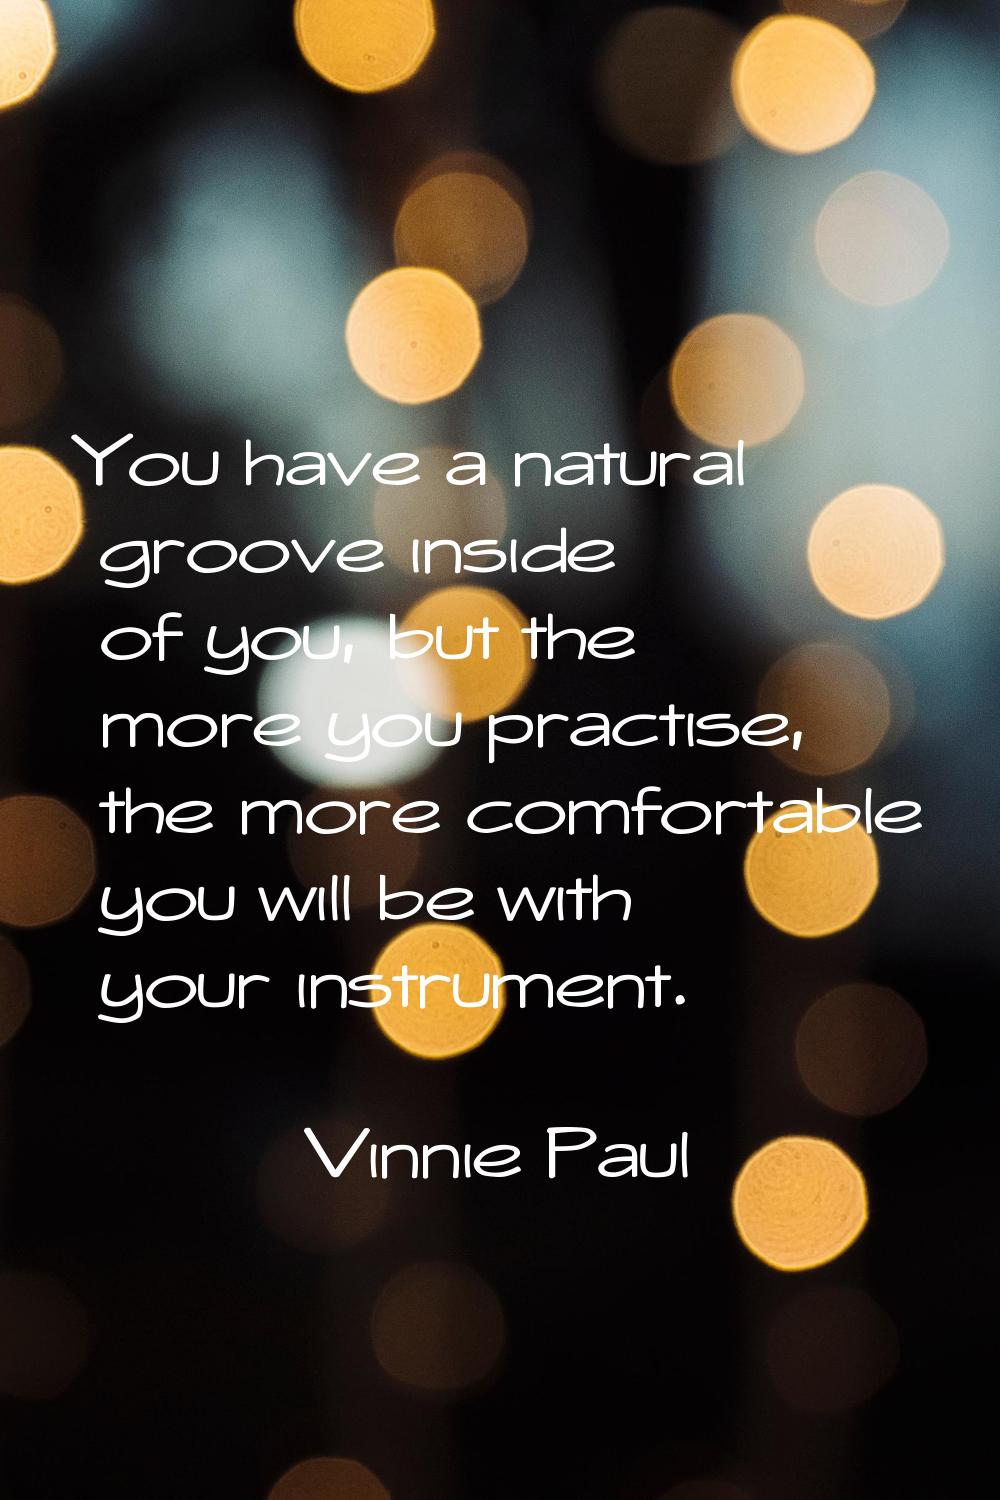 You have a natural groove inside of you, but the more you practise, the more comfortable you will b